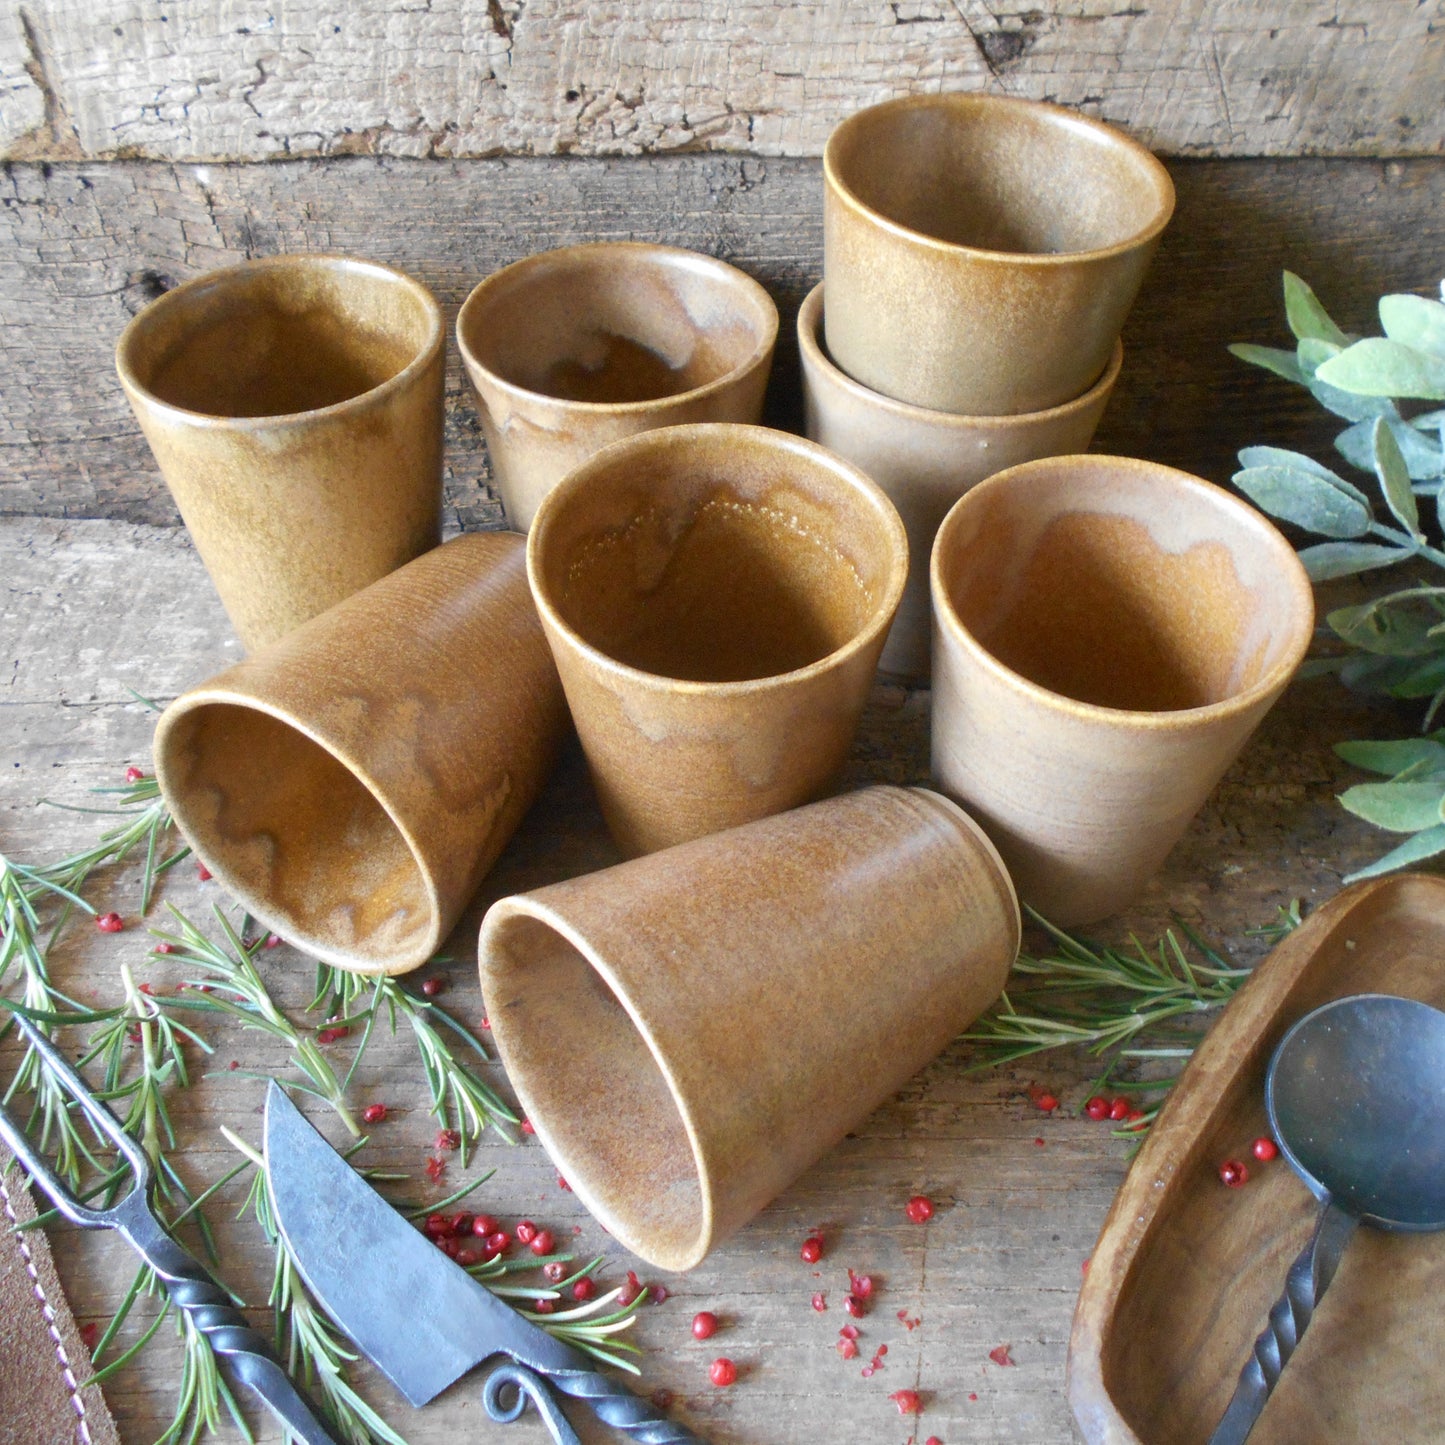 Eight Digoin Stoneware Tumblers. Medieval Re-enactment Pottery Goblets. from Tiggy & Pip - €96.00! Shop now at Tiggy and Pip